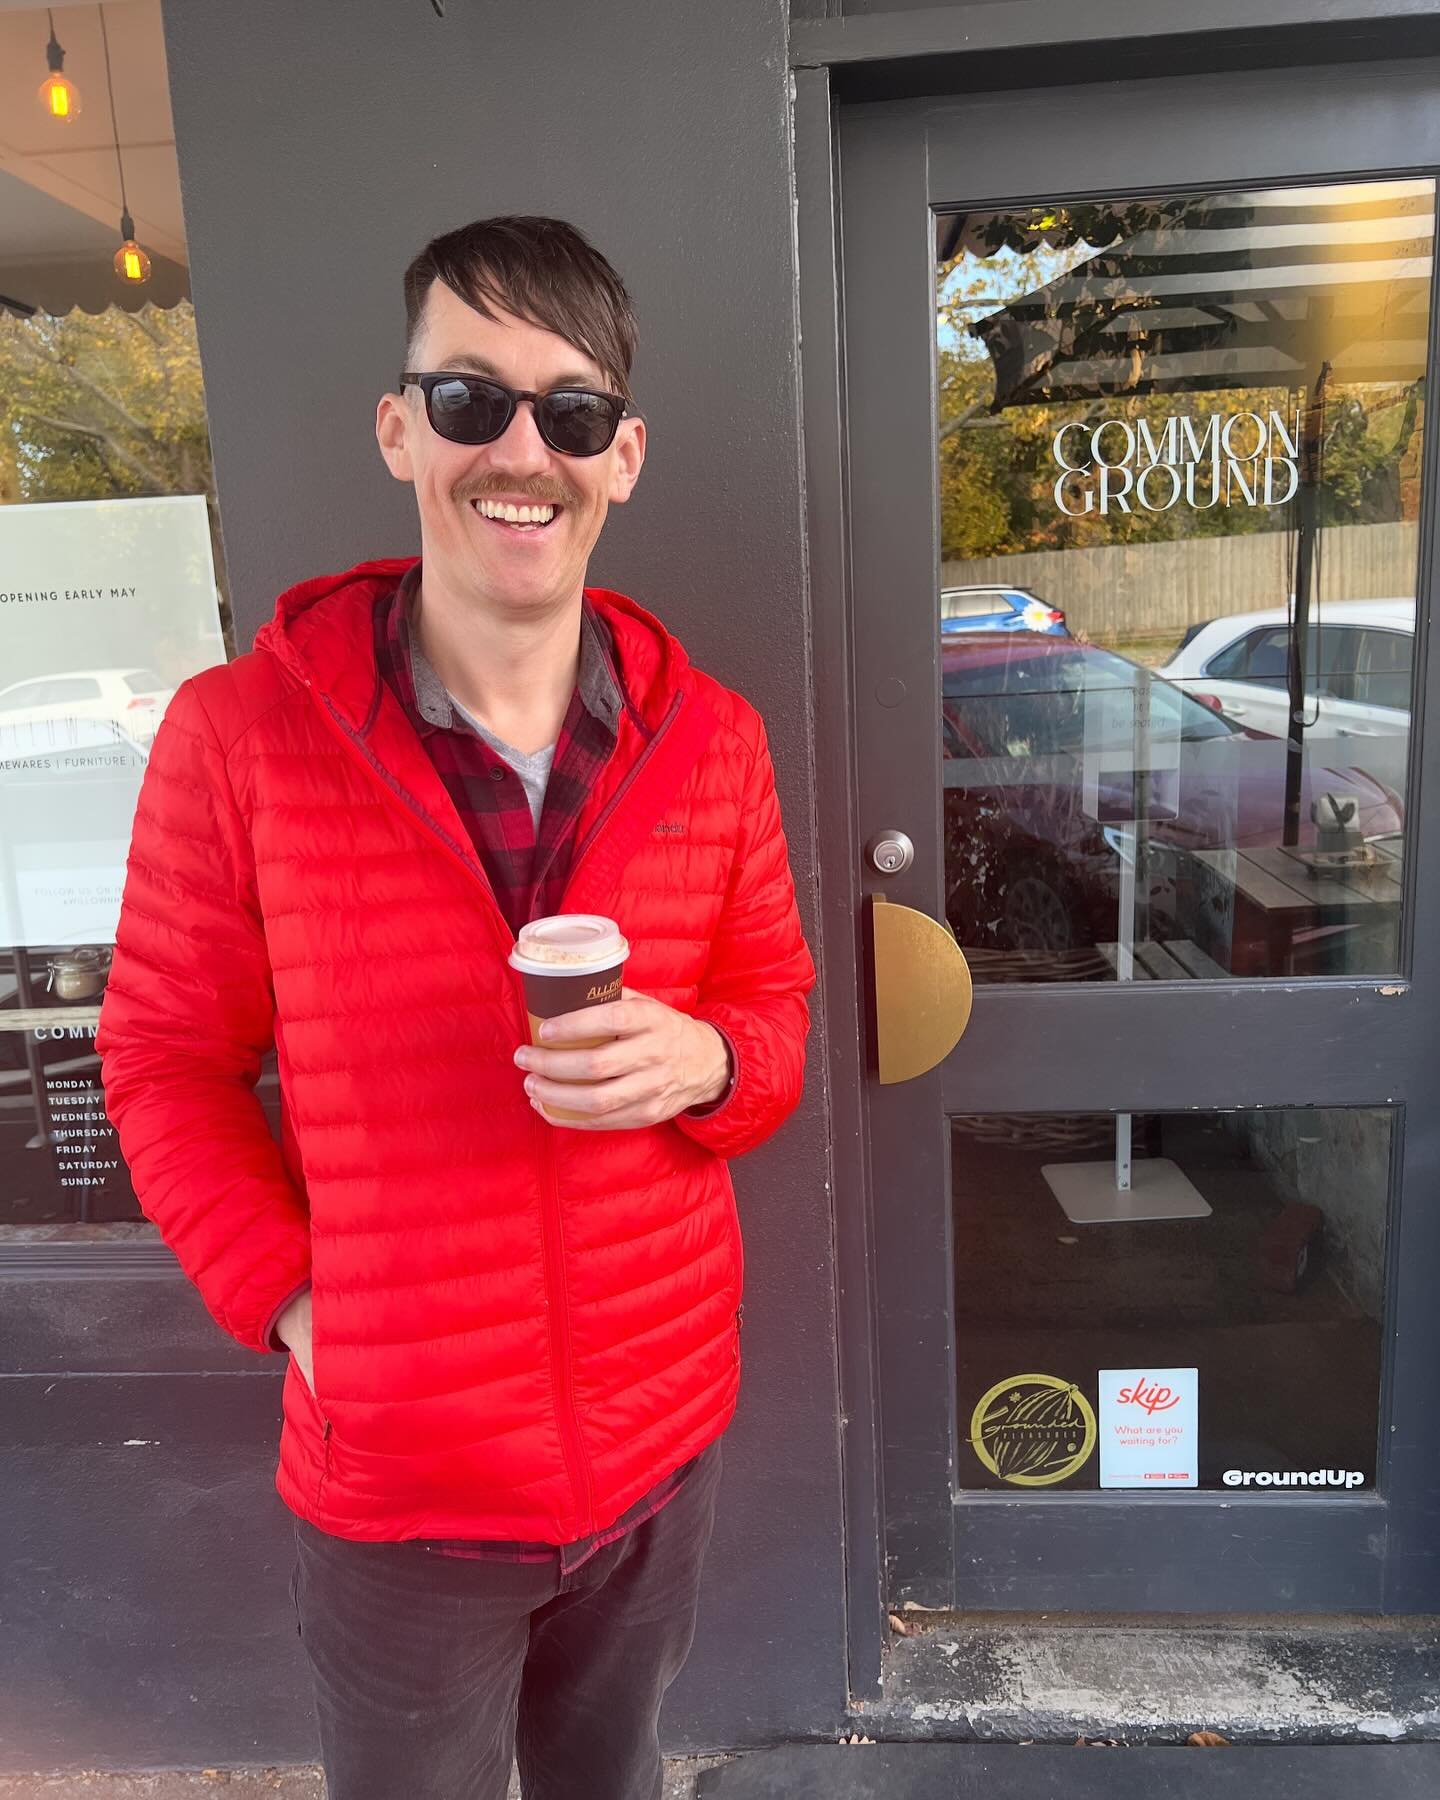 ☕️ Fueling up at @commongroundballarat before a 12.5km hike in Ross Creek 🥾 What are your plans for this beautiful sunny weekend? ☀️